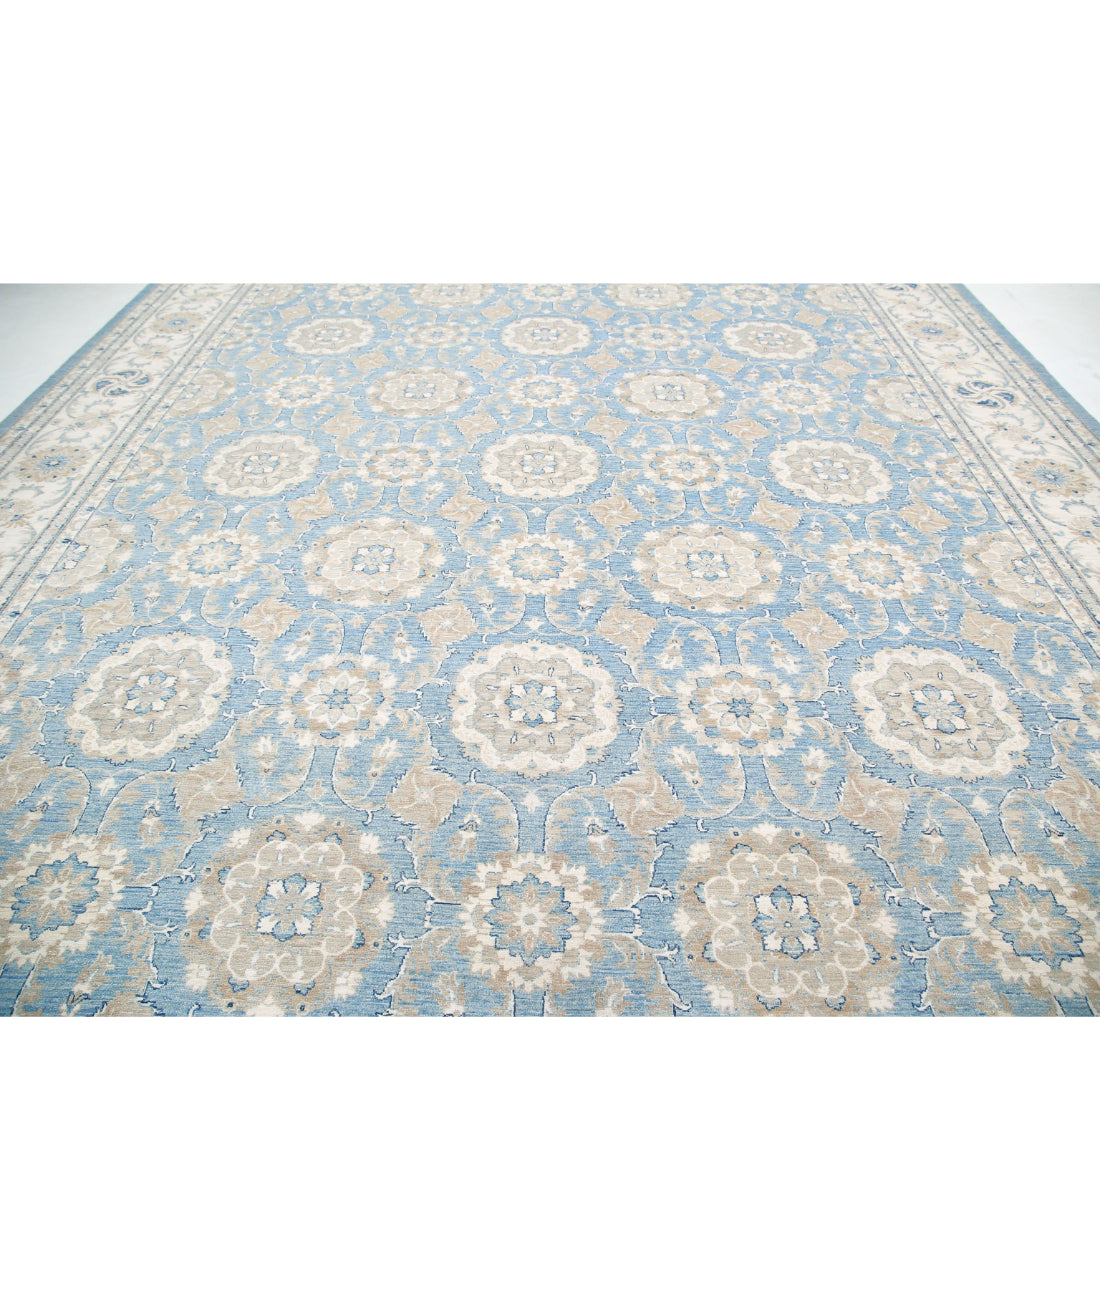 Serenity 13'2'' X 16'10'' Hand-Knotted Wool Rug 13'2'' x 16'10'' (395 X 505) / Blue / Ivory